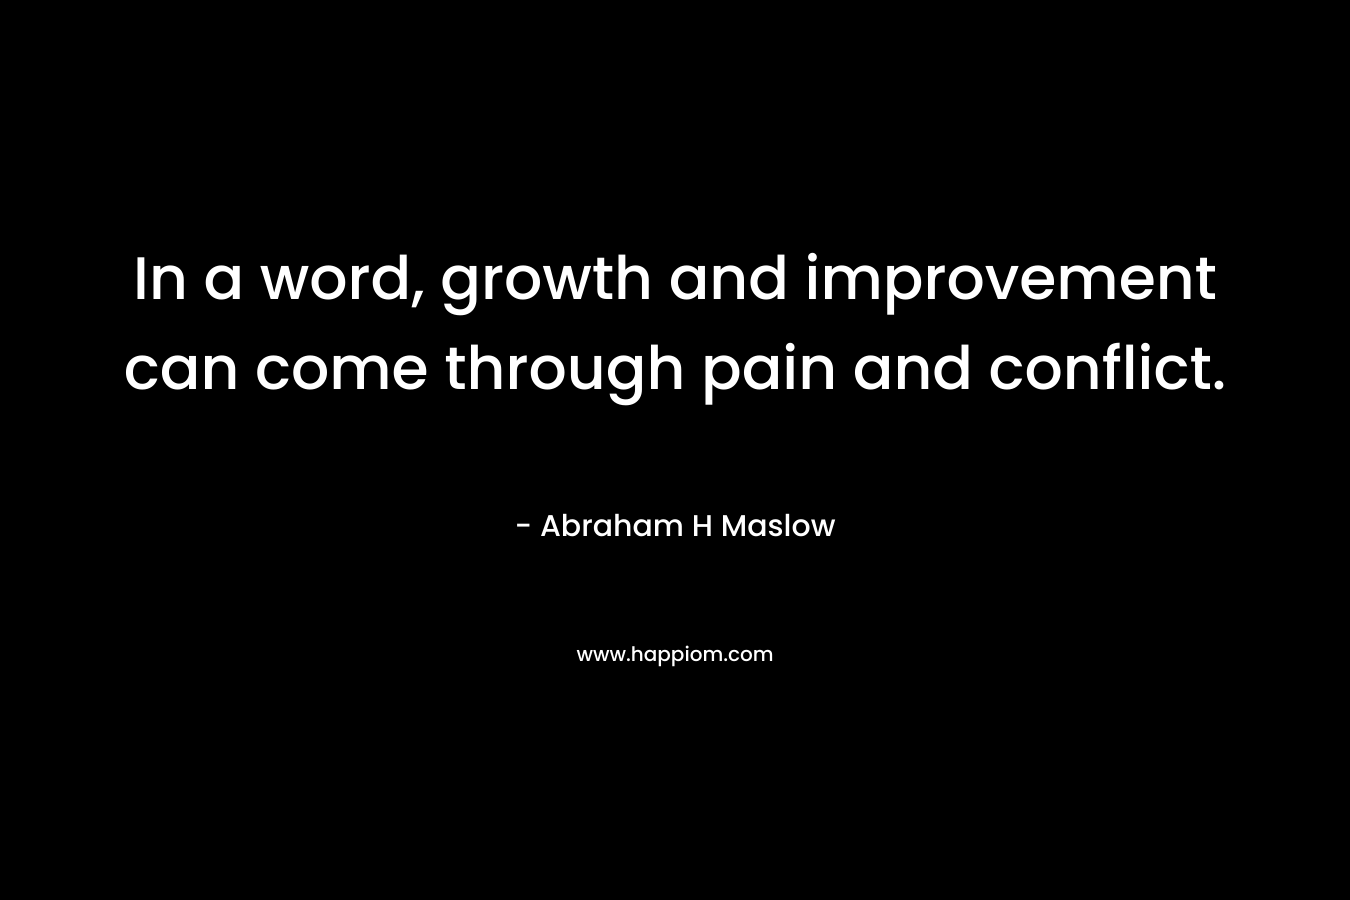 In a word, growth and improvement can come through pain and conflict.